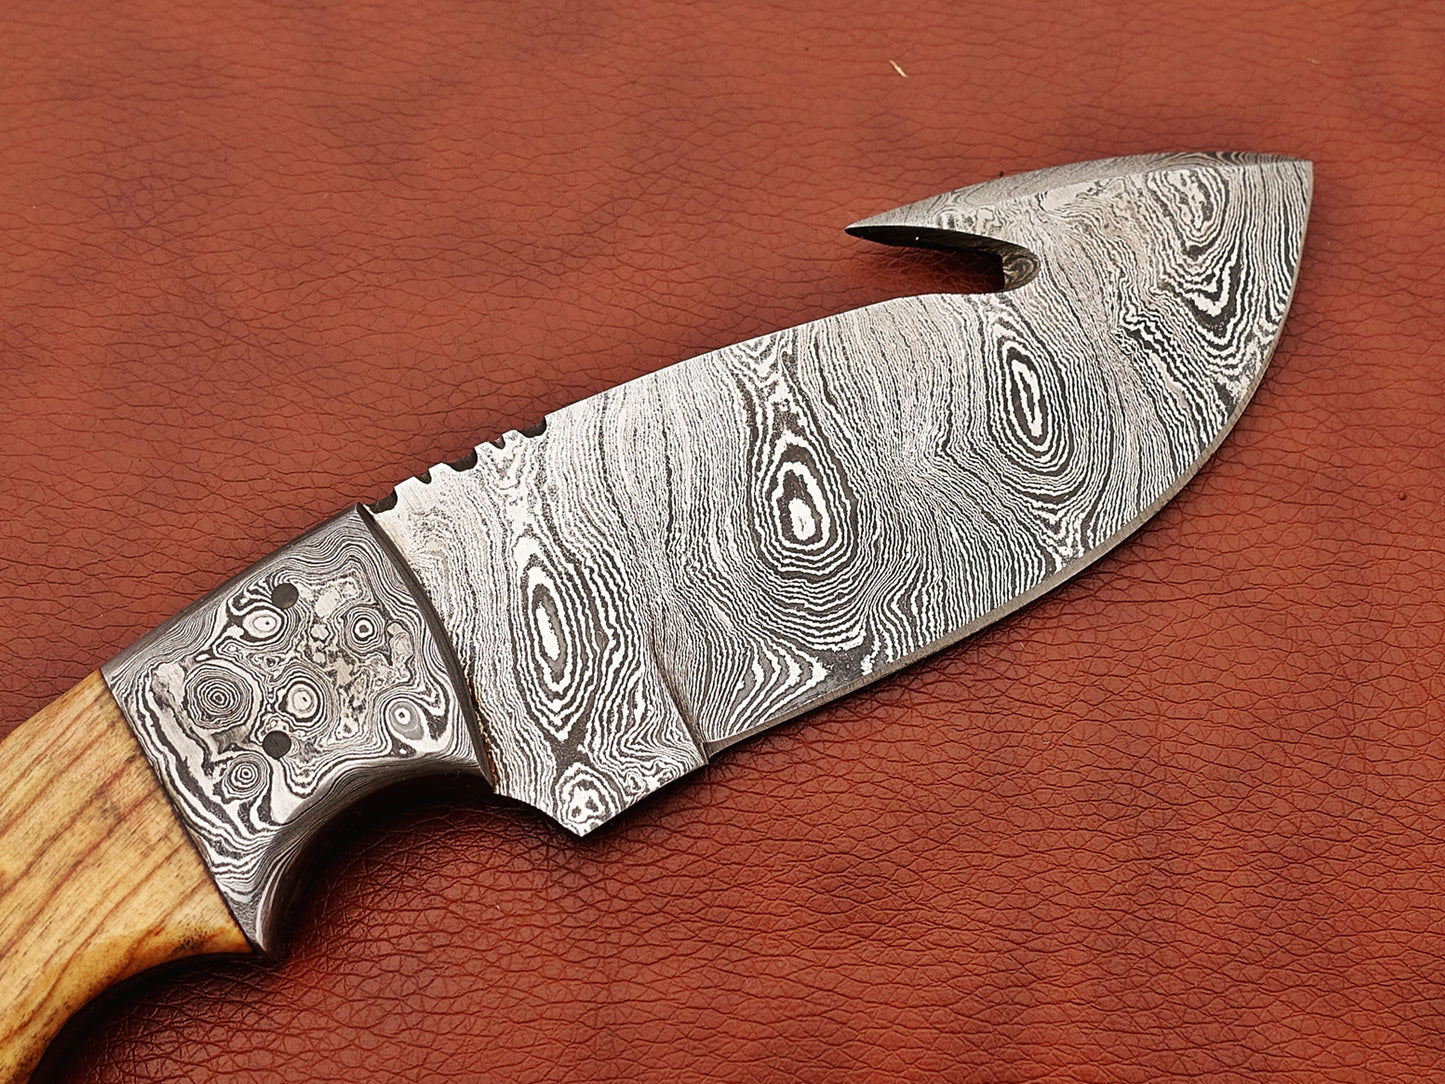 9.5" long Damascus steel Rain drop pattern Gut hook skinning knife, Full tang blade available in 4 colors, includes Cow hide Leather sheath